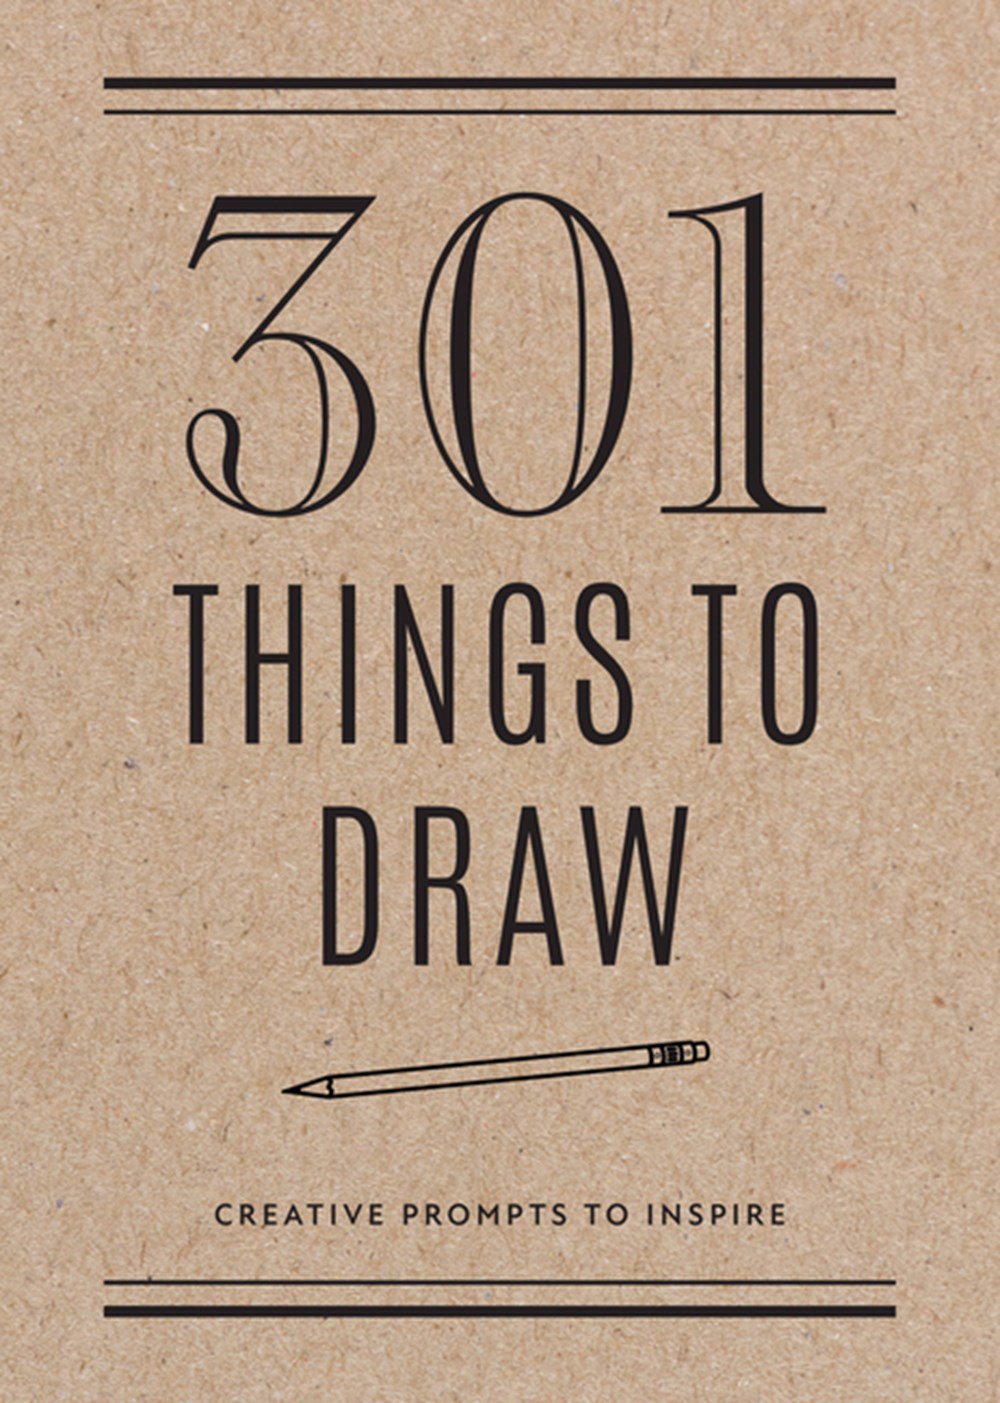 301 Things to Draw - Second Edition Creative Prompts to Inspire